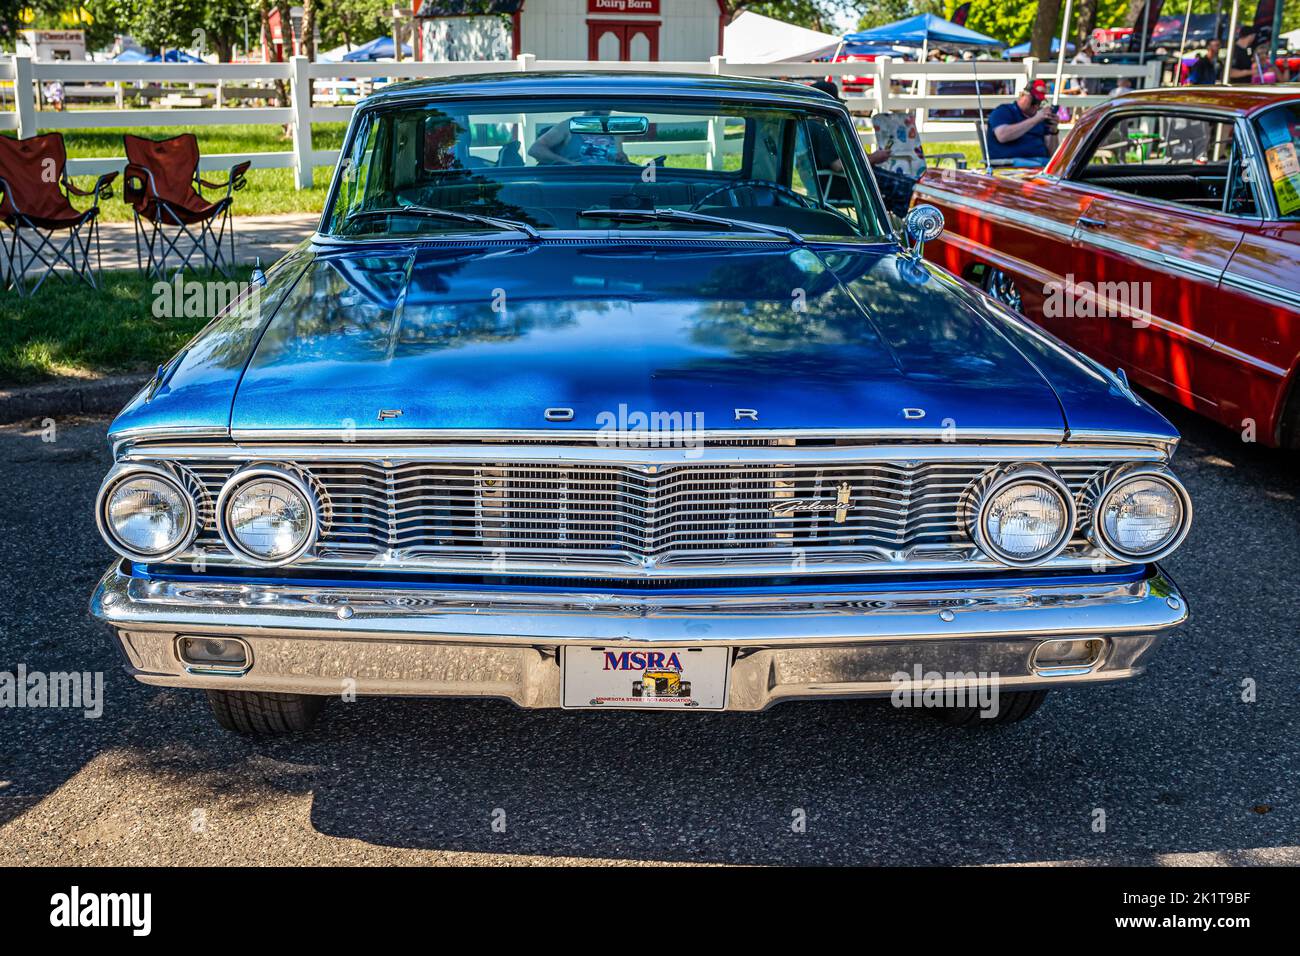 Falcon Heights, MN - June 18, 2022: High perspective front view of a 1964 Ford Galaxie 500 Club Coupe at a local car show. Stock Photo